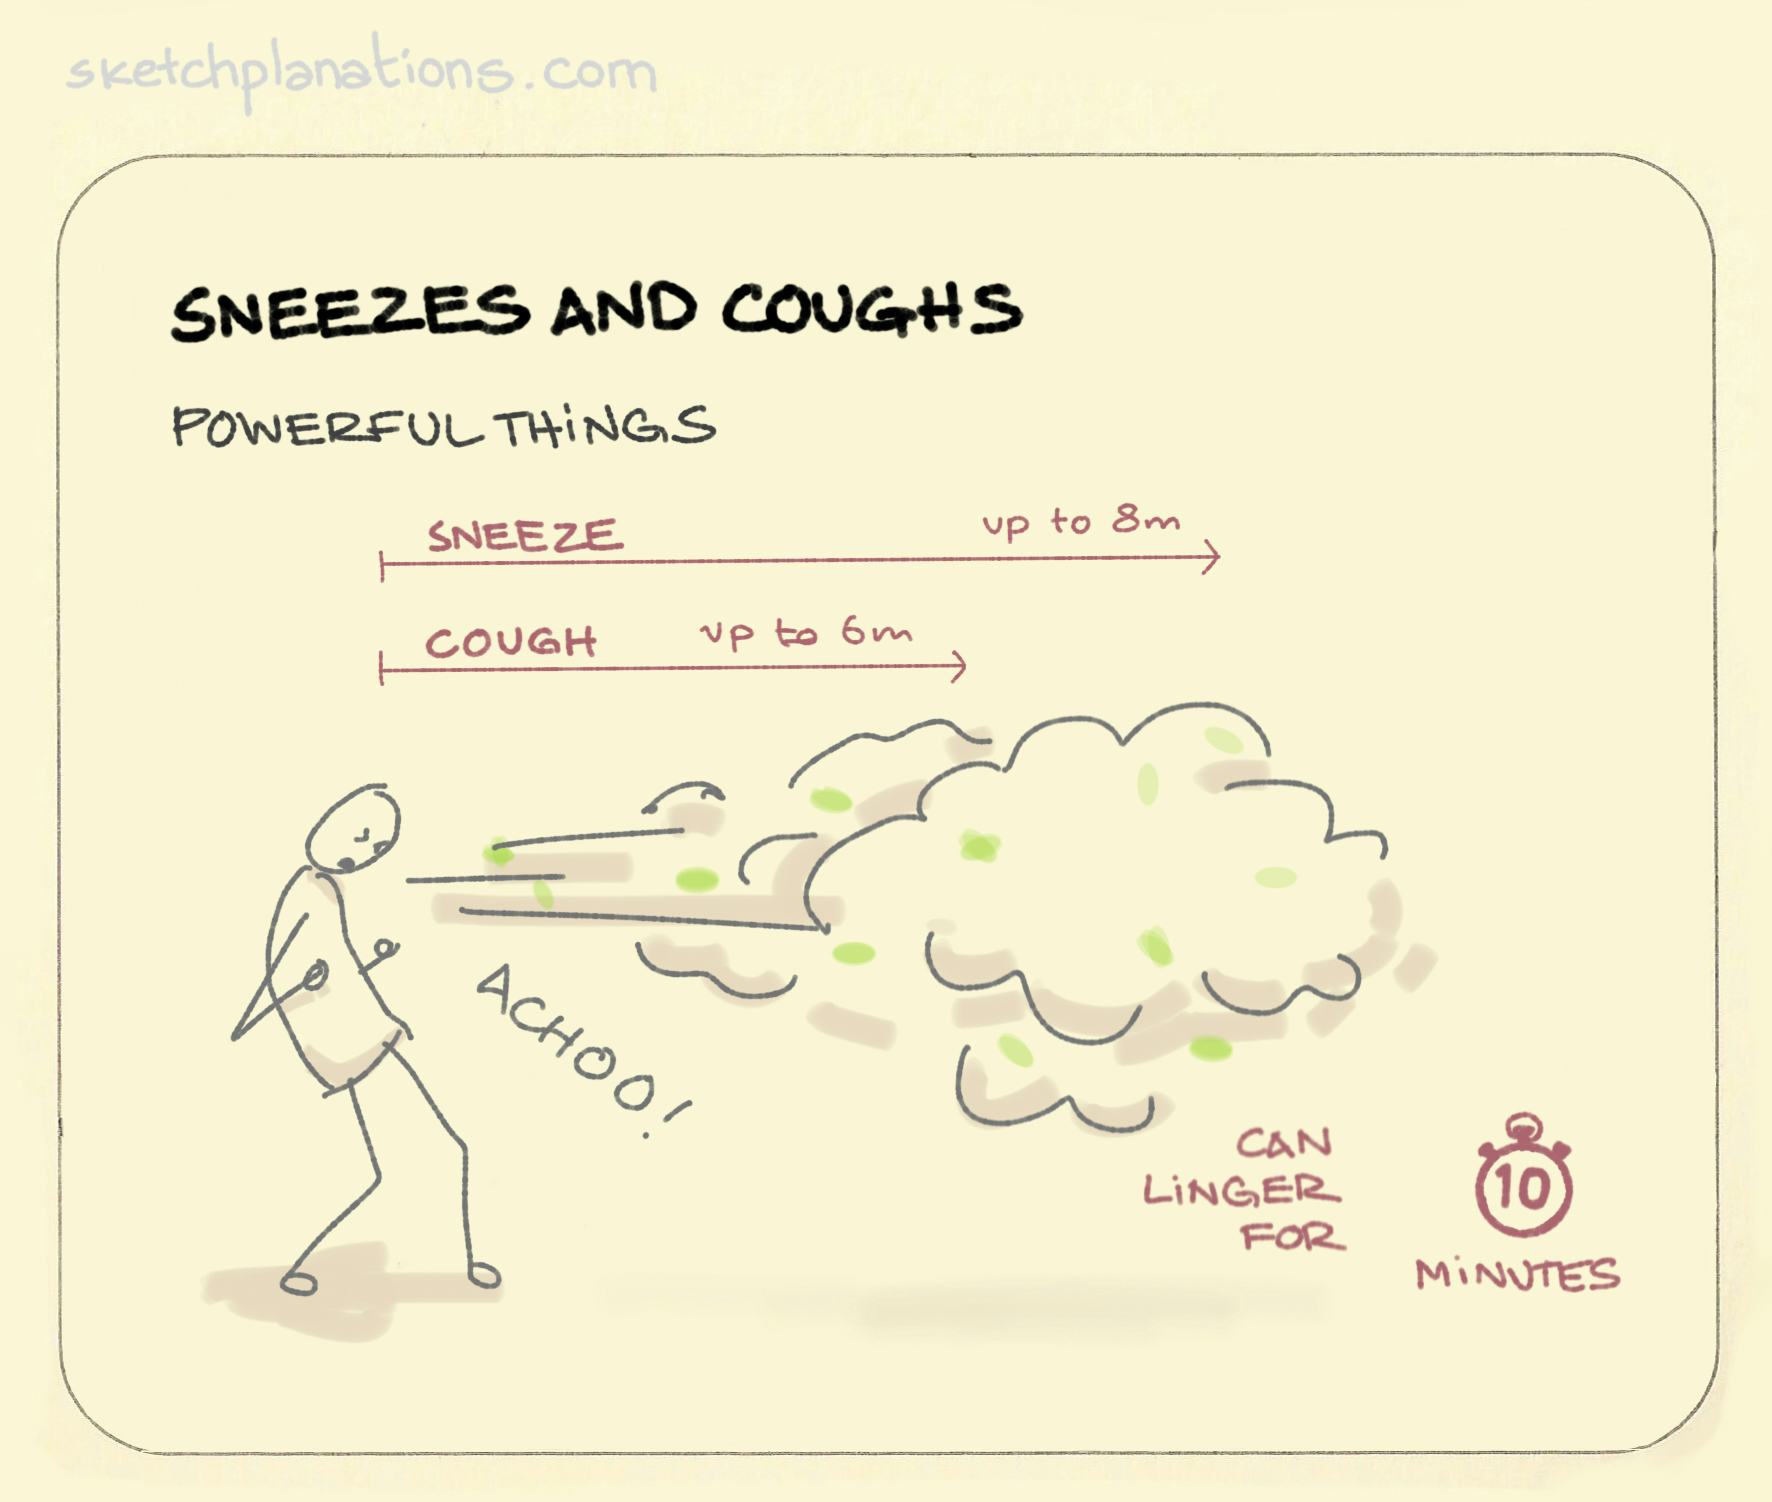 Sneezes and coughs - Sketchplanations